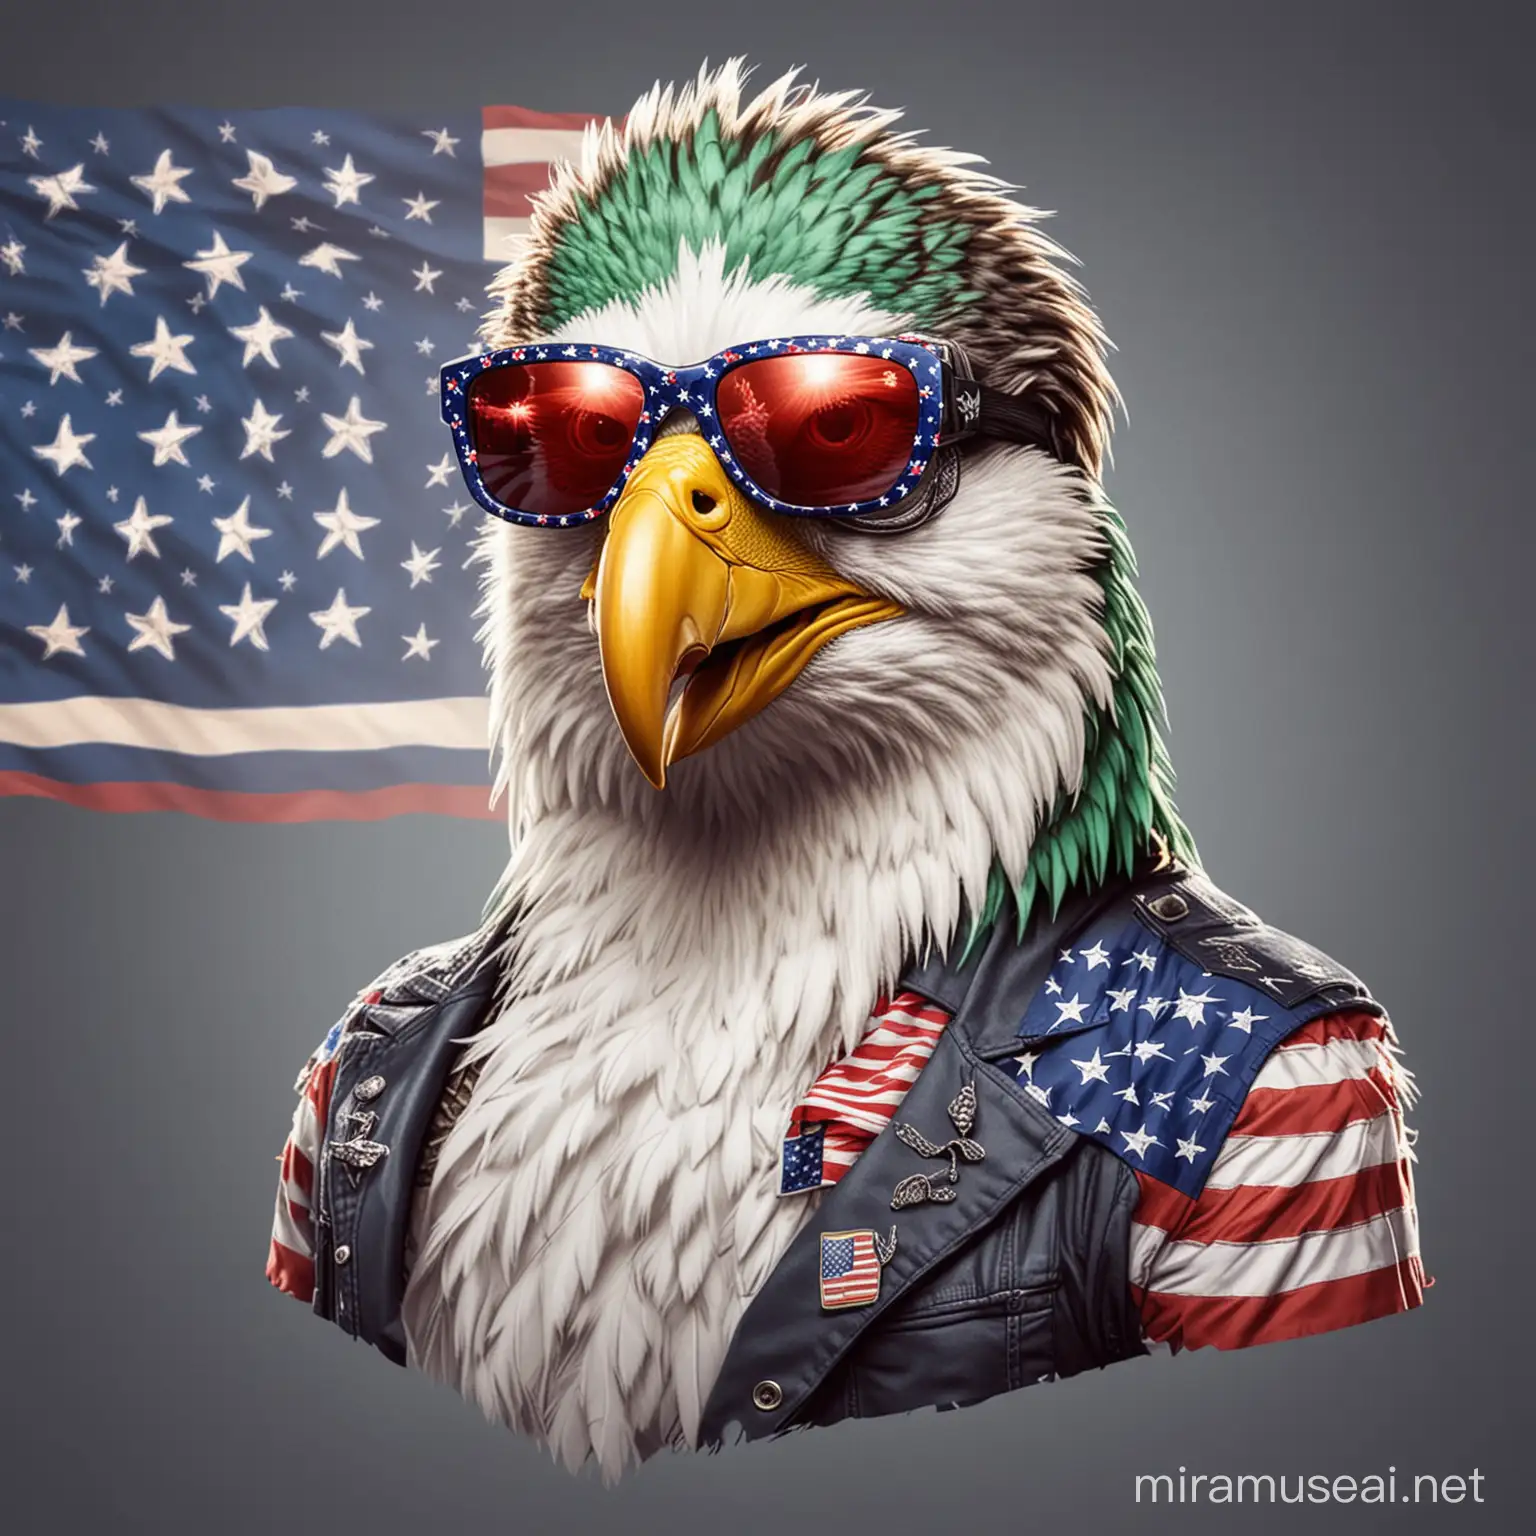 funny and cool American eagle character for a meme crypto currency coin
 wear Pit Viper sunglasses and have an American flag as a mullet.
- The style should be a meme cartoon drawing.